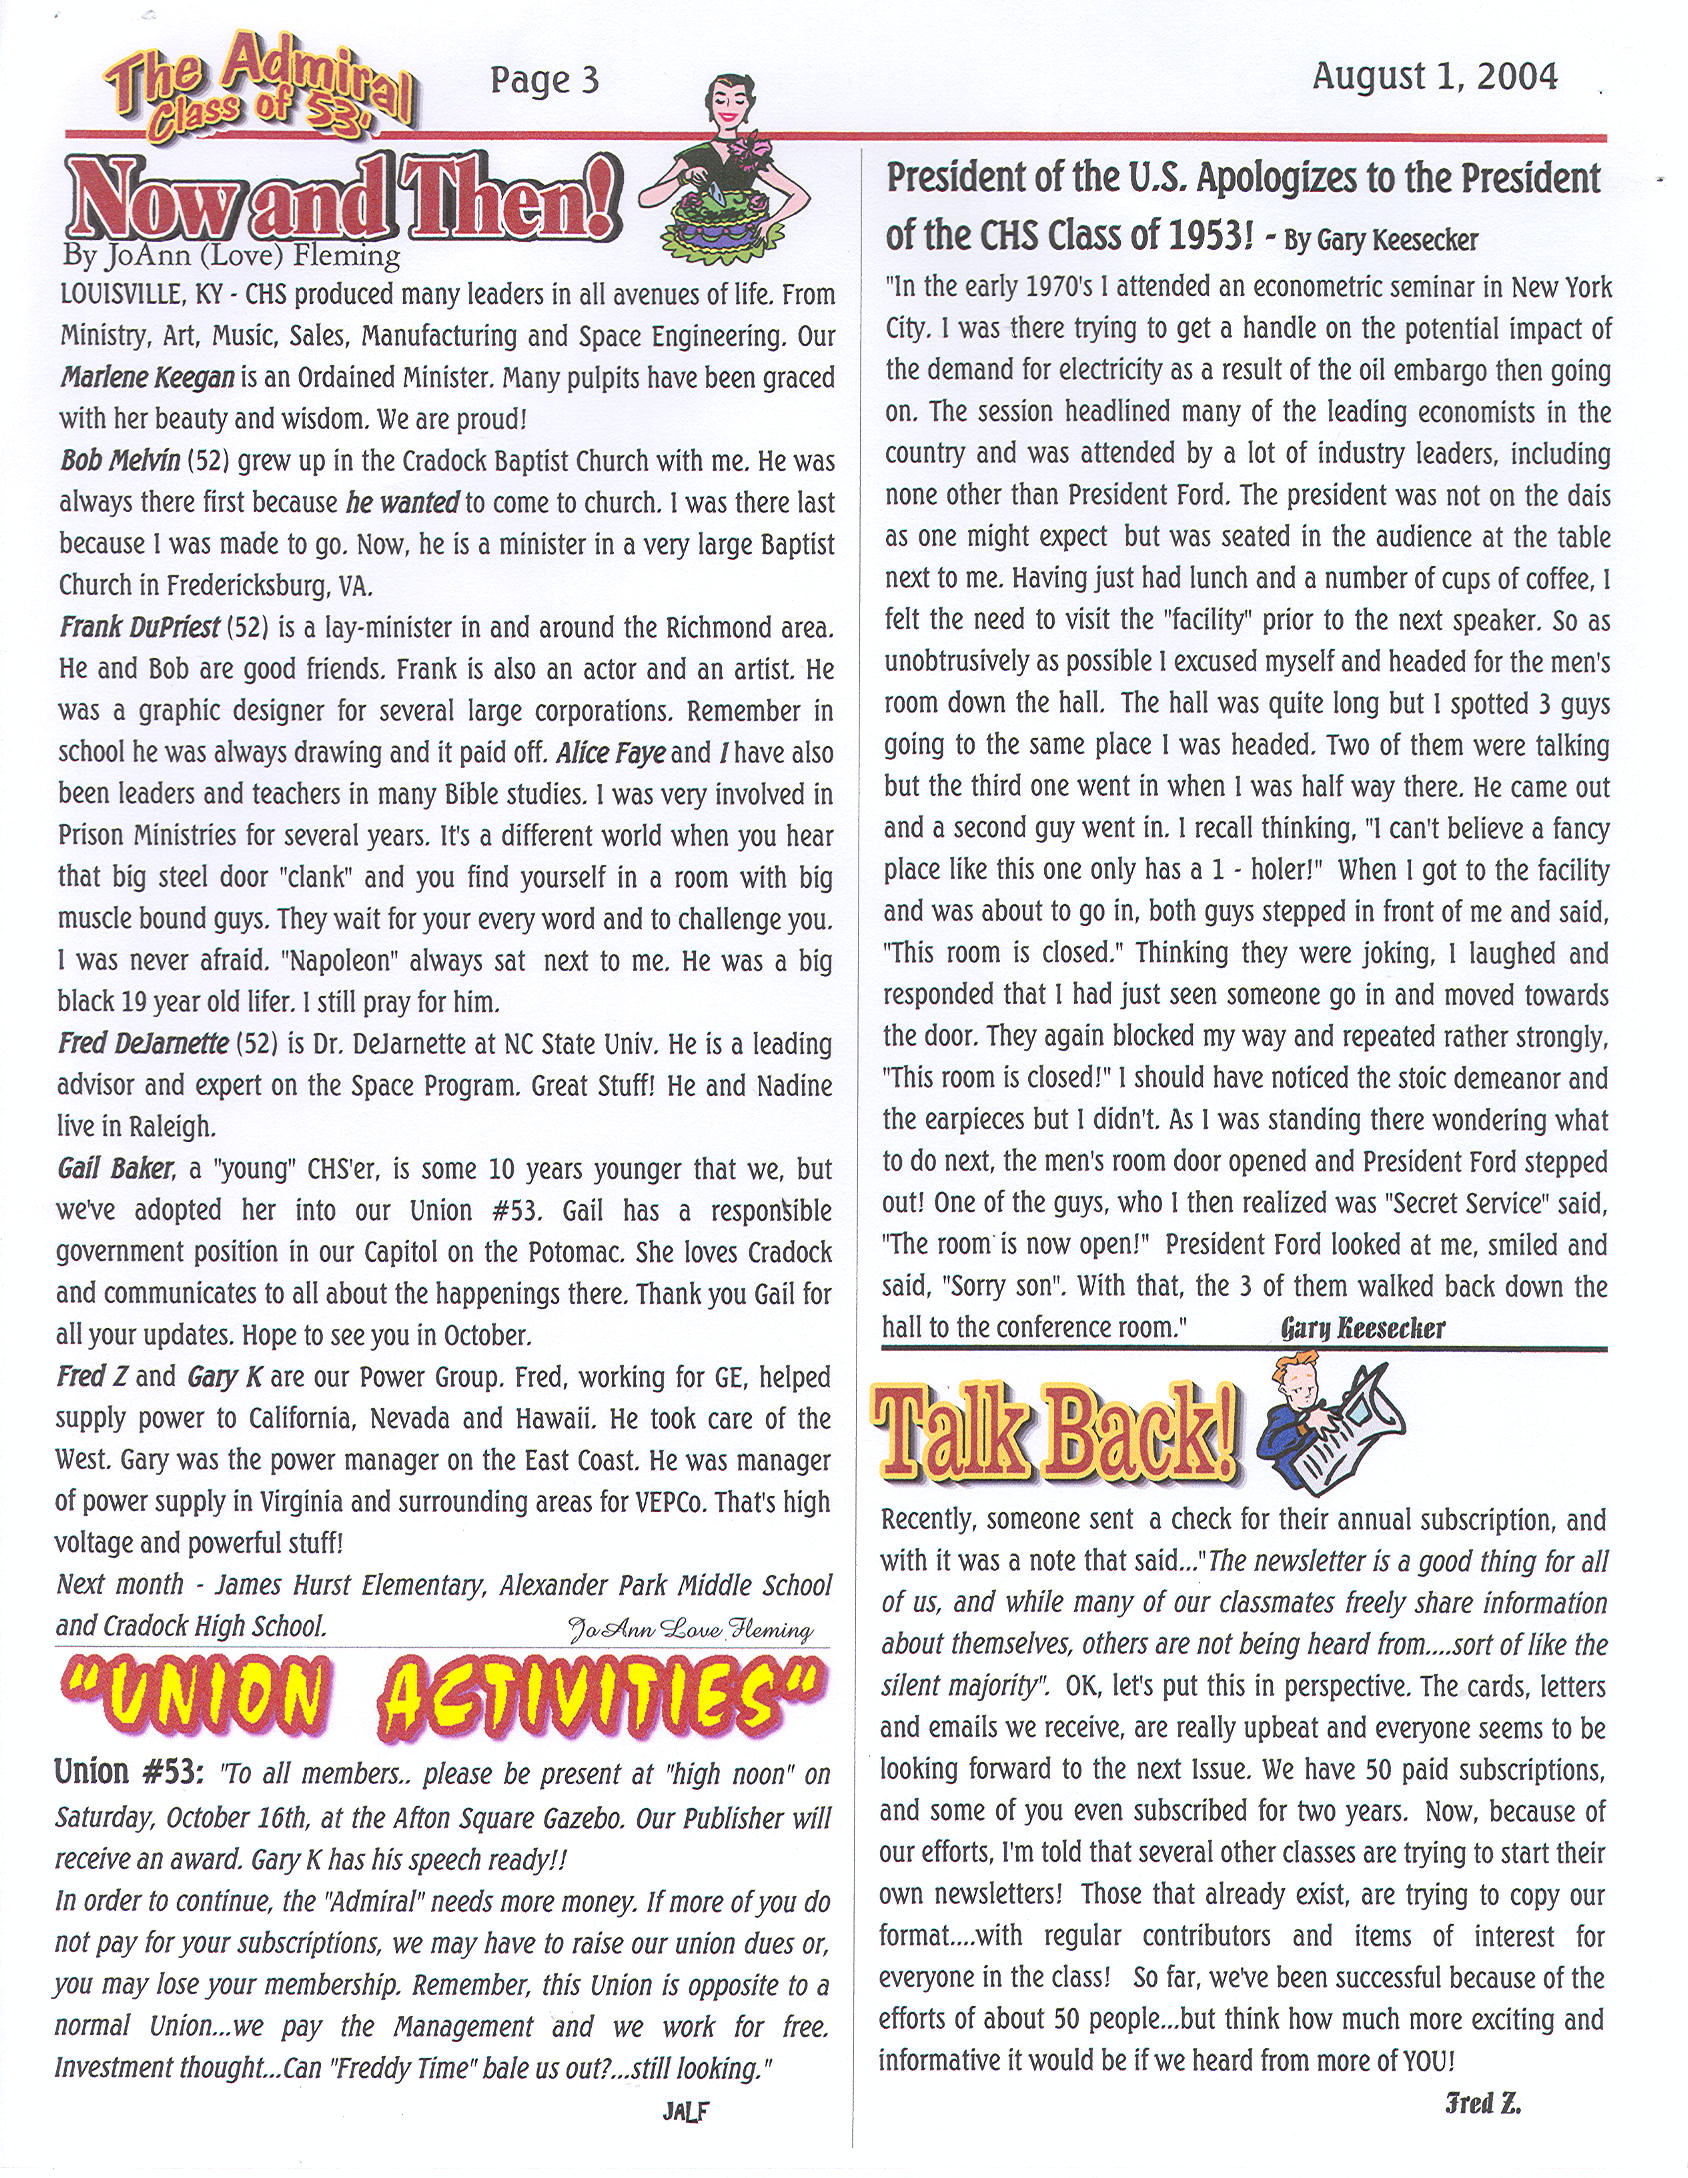 The Admiral - August 2004 - pg. 3